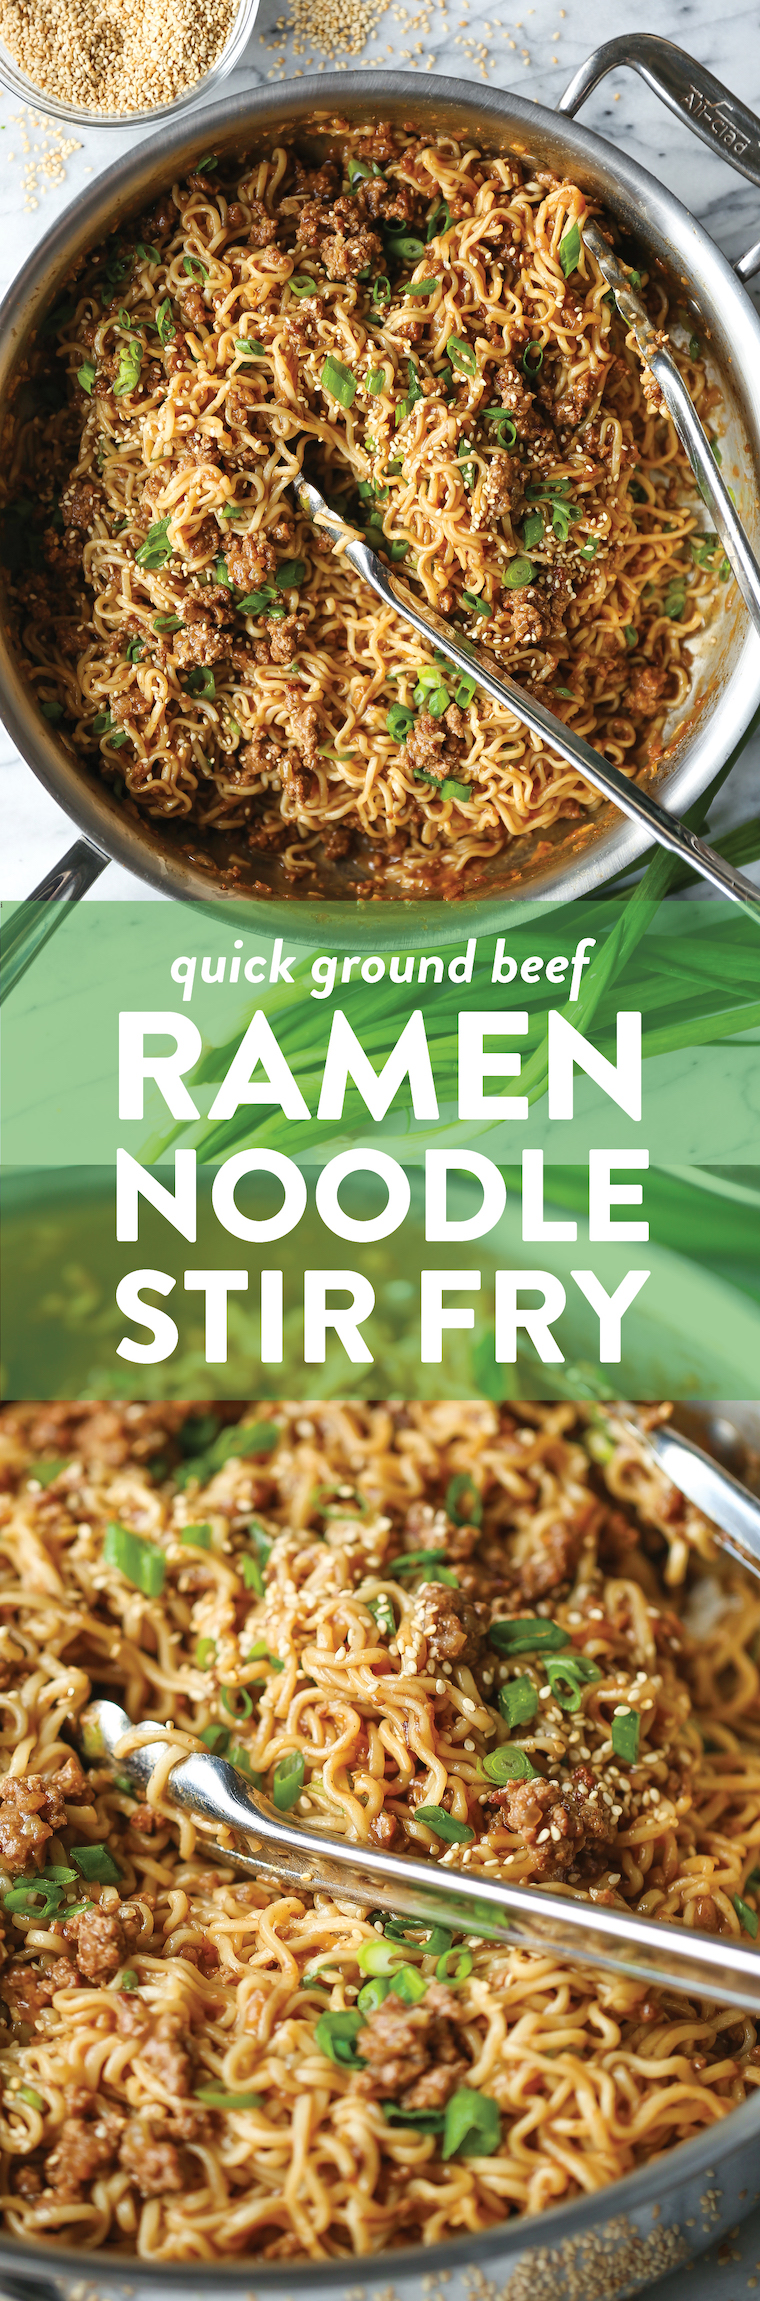 Quick Ramen Noodle Stir Fry - Fast, easy and budget-friendly using ramen noodles and ground beef for an amazing, saucy stir fry the whole family will love!